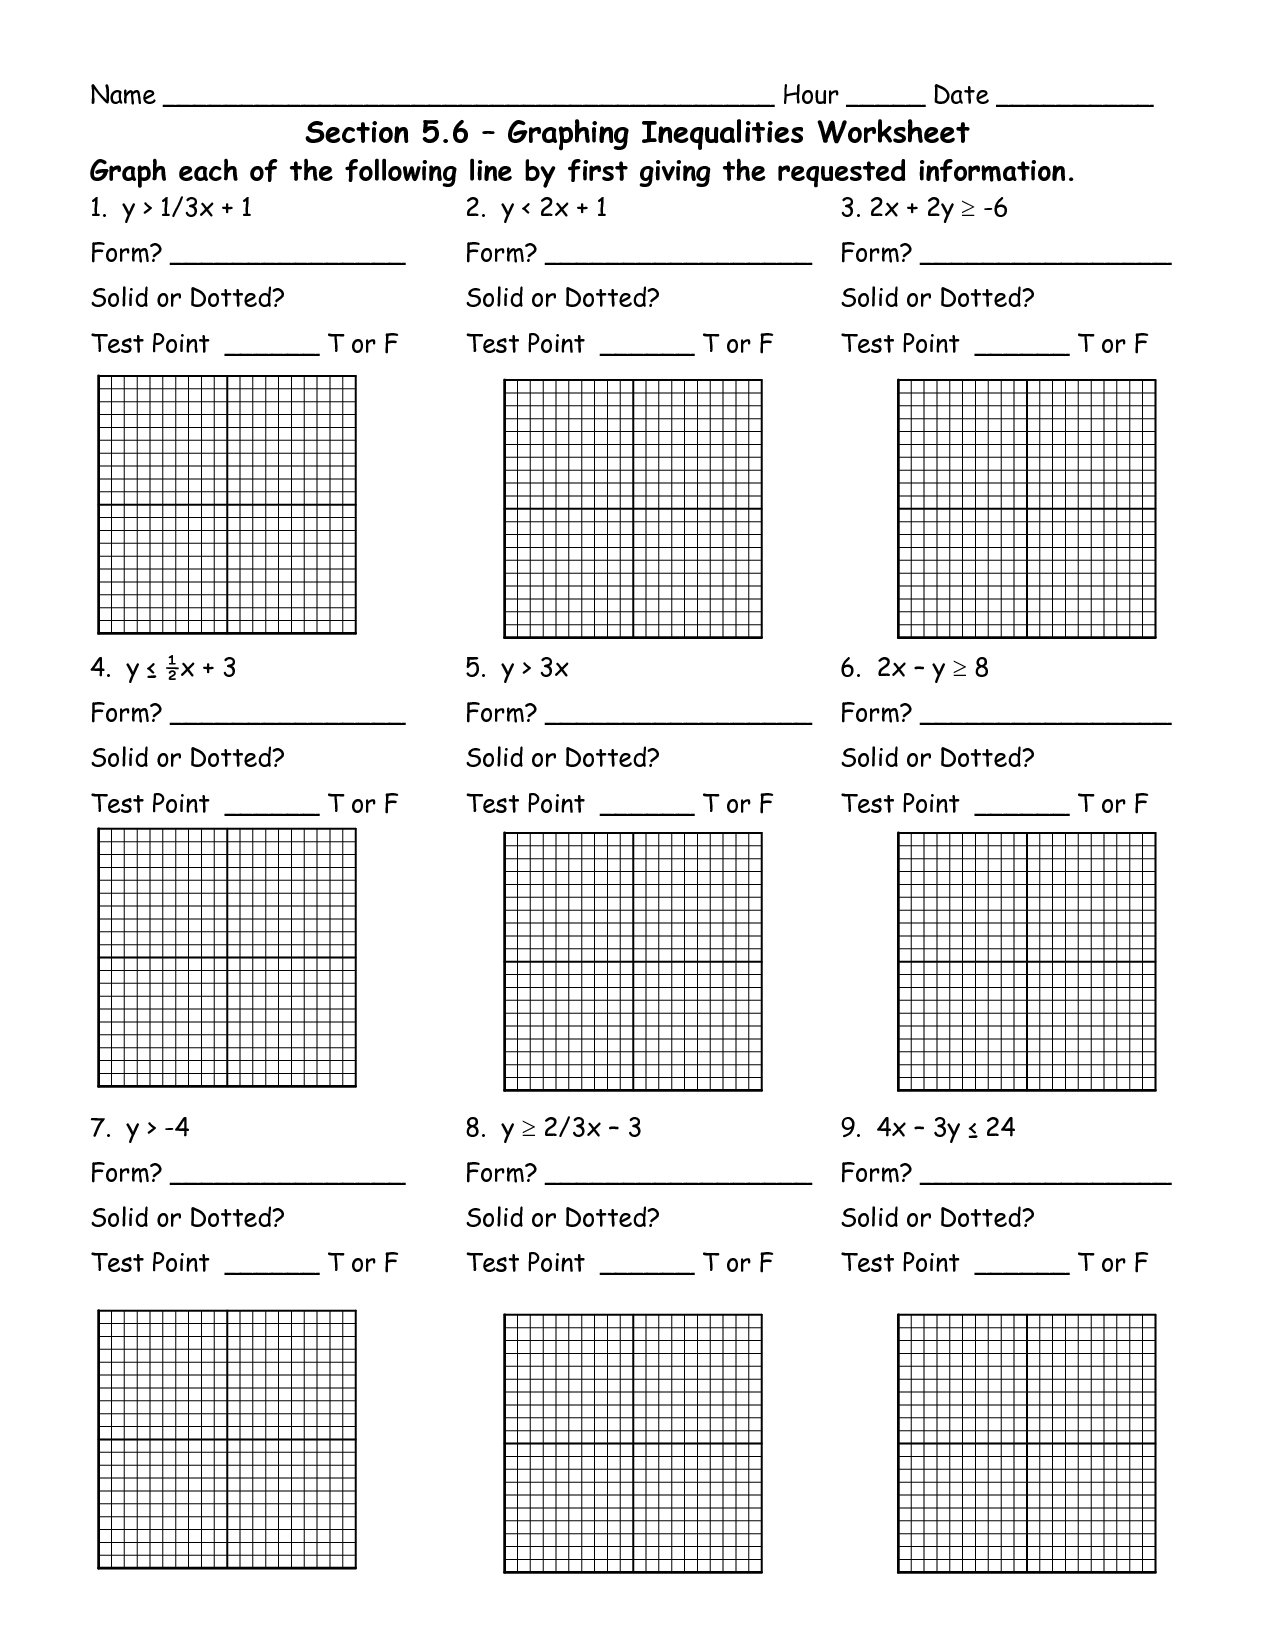 Inequality Graphing Worksheet Image